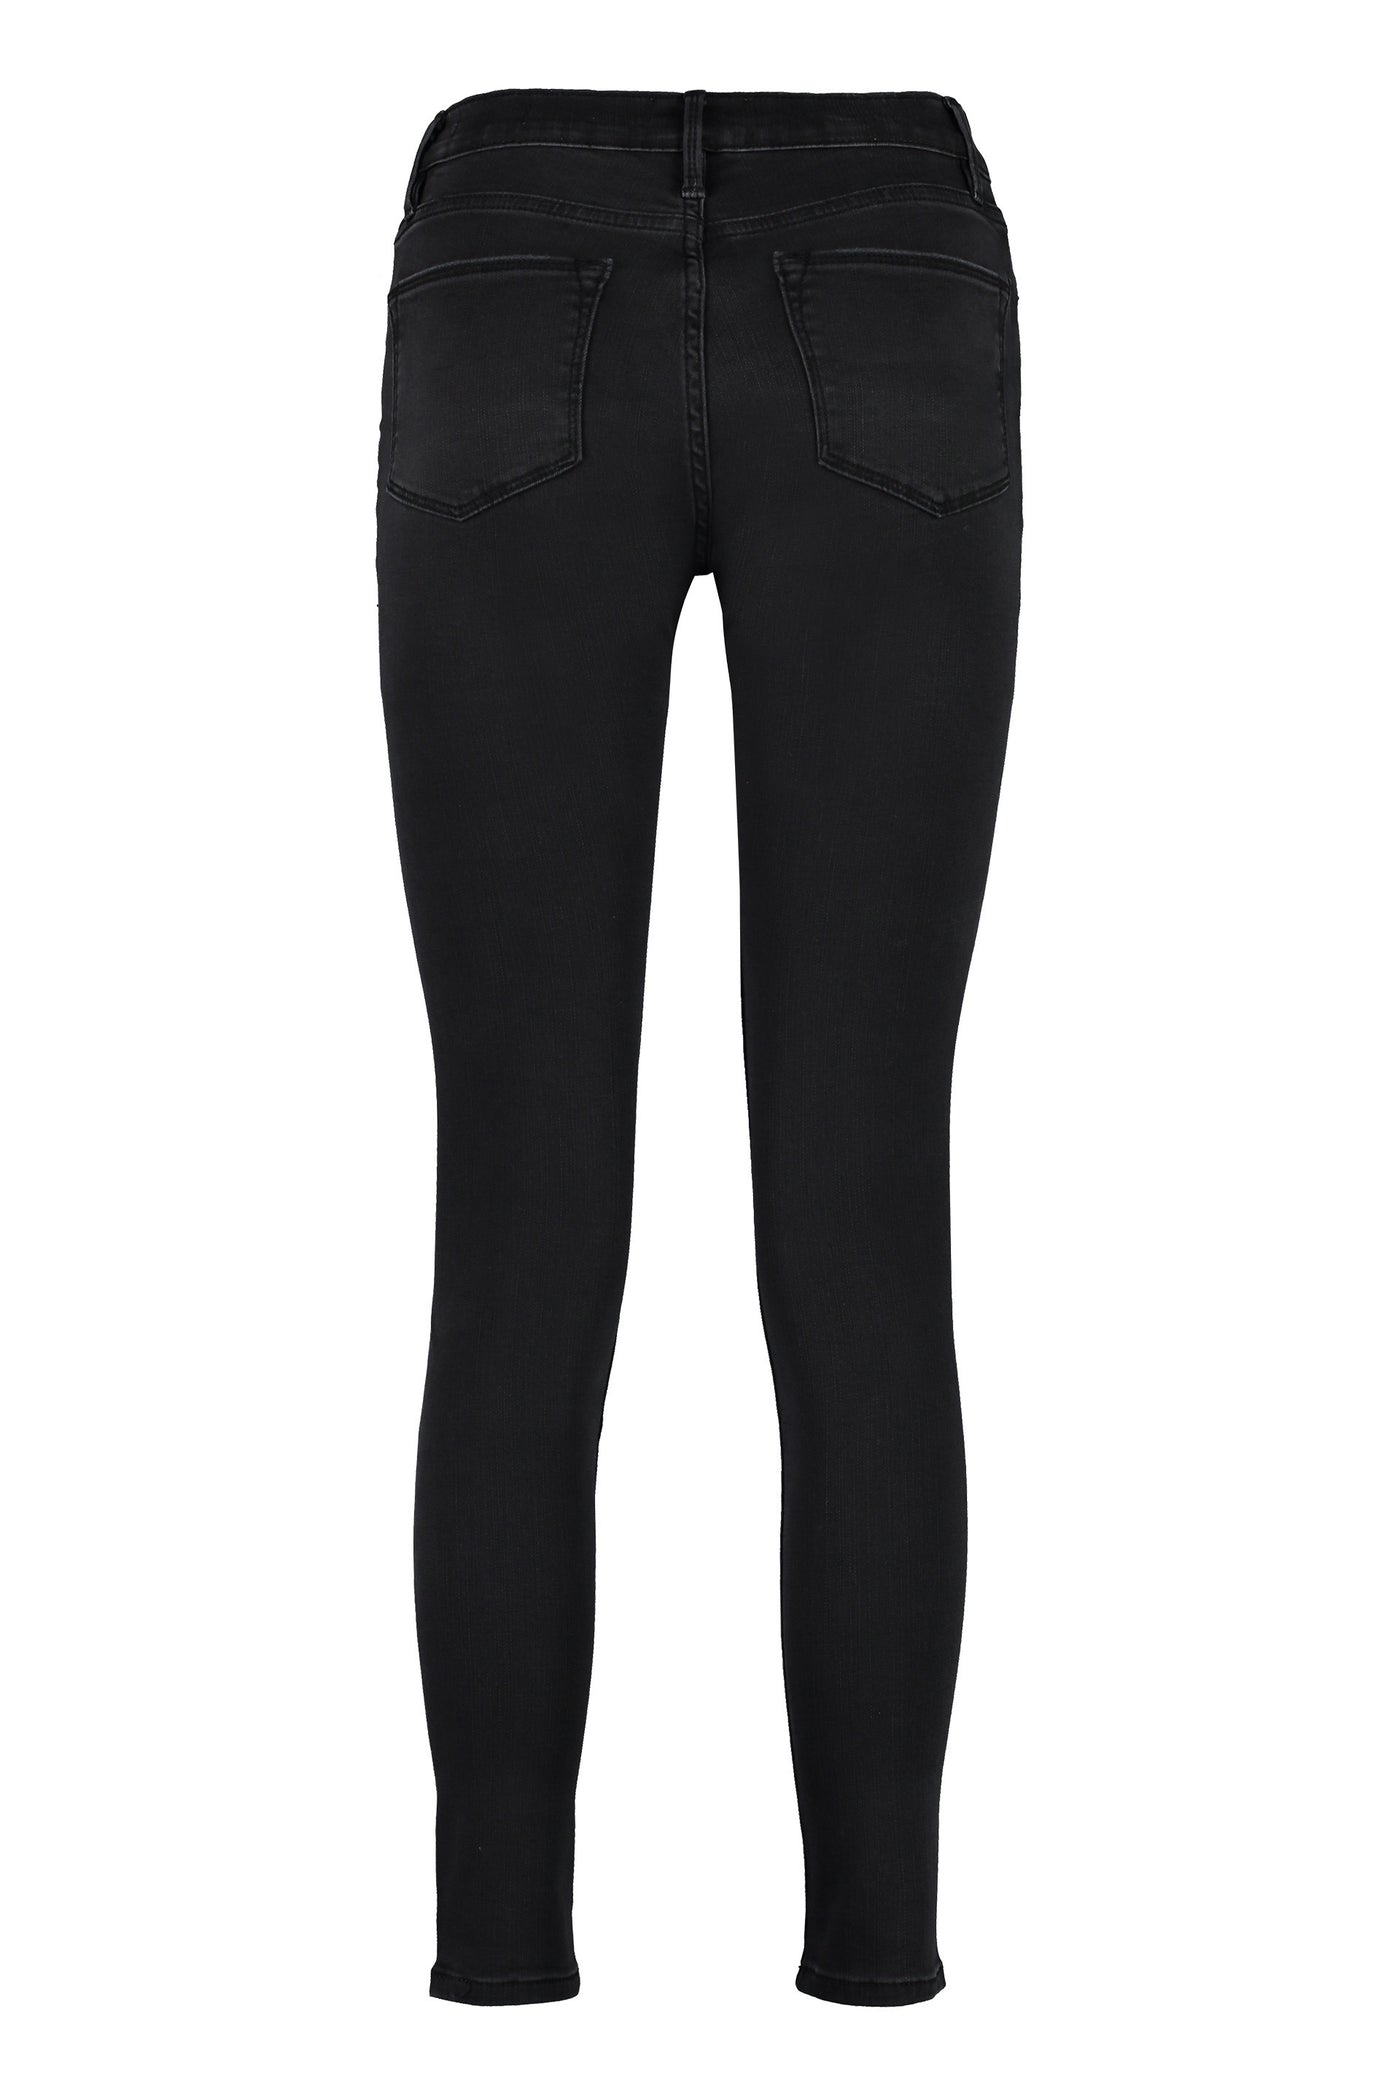 KERRY FRAME HIGH-RISE SKINNY JEANS